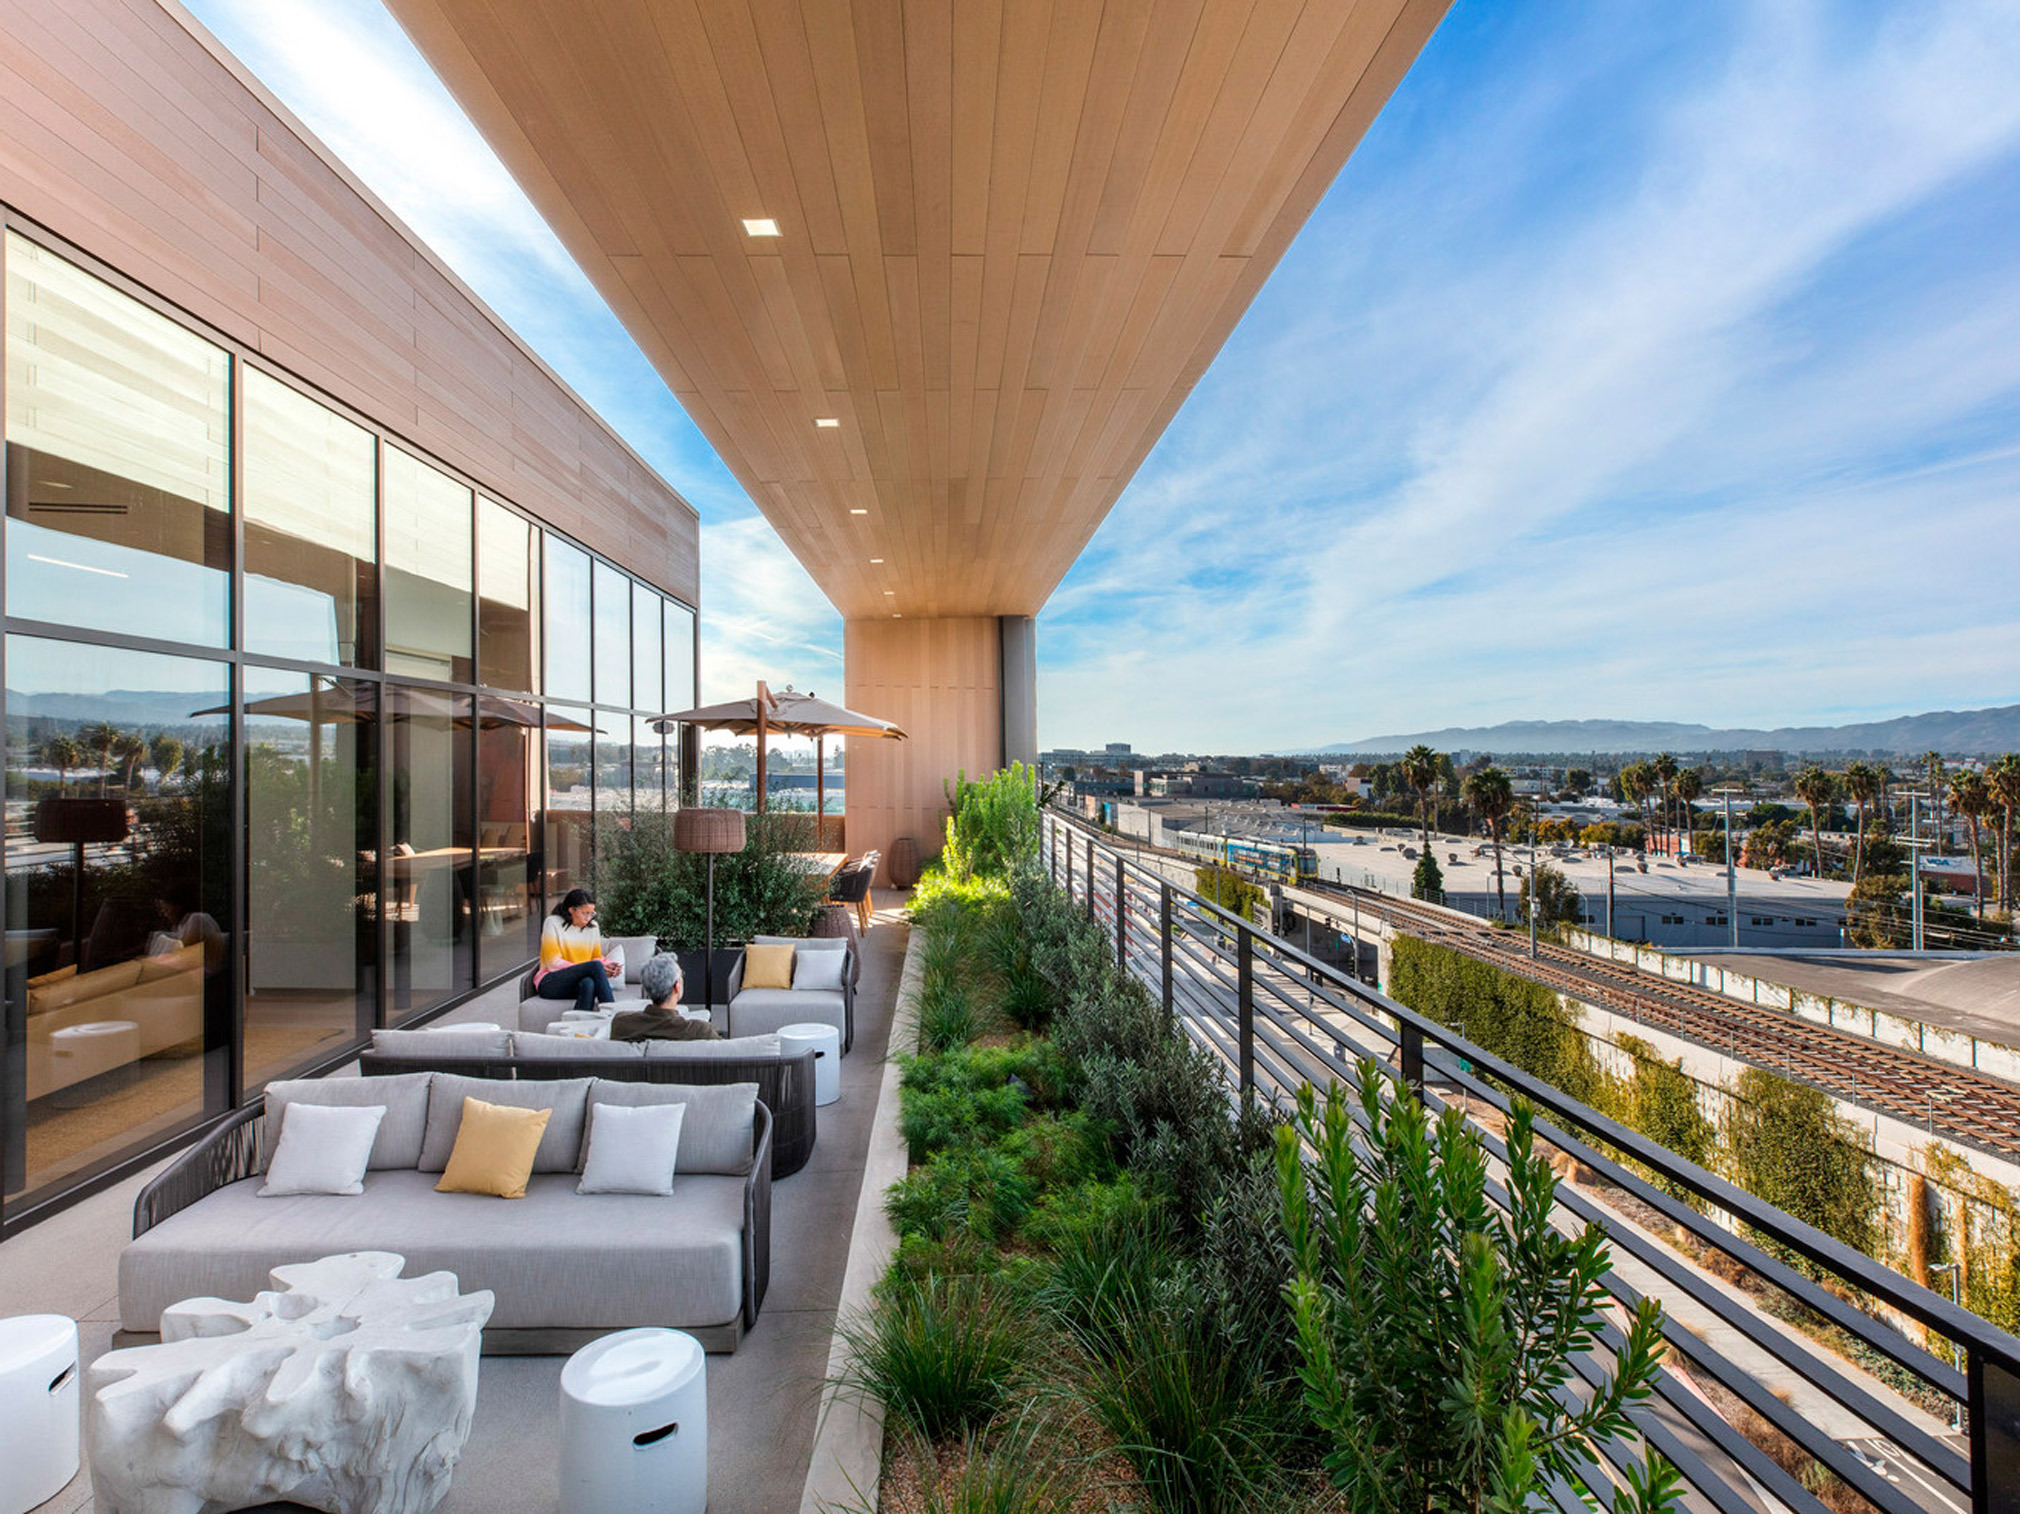 Open-plan terrace featuring floor-to-ceiling glass walls, minimalist furniture with neutral upholstery, and wooden ceiling extending outdoors, harmonizing with panoramic views of the urban skyline. Well-positioned greenery adds a touch of nature to the modern space.